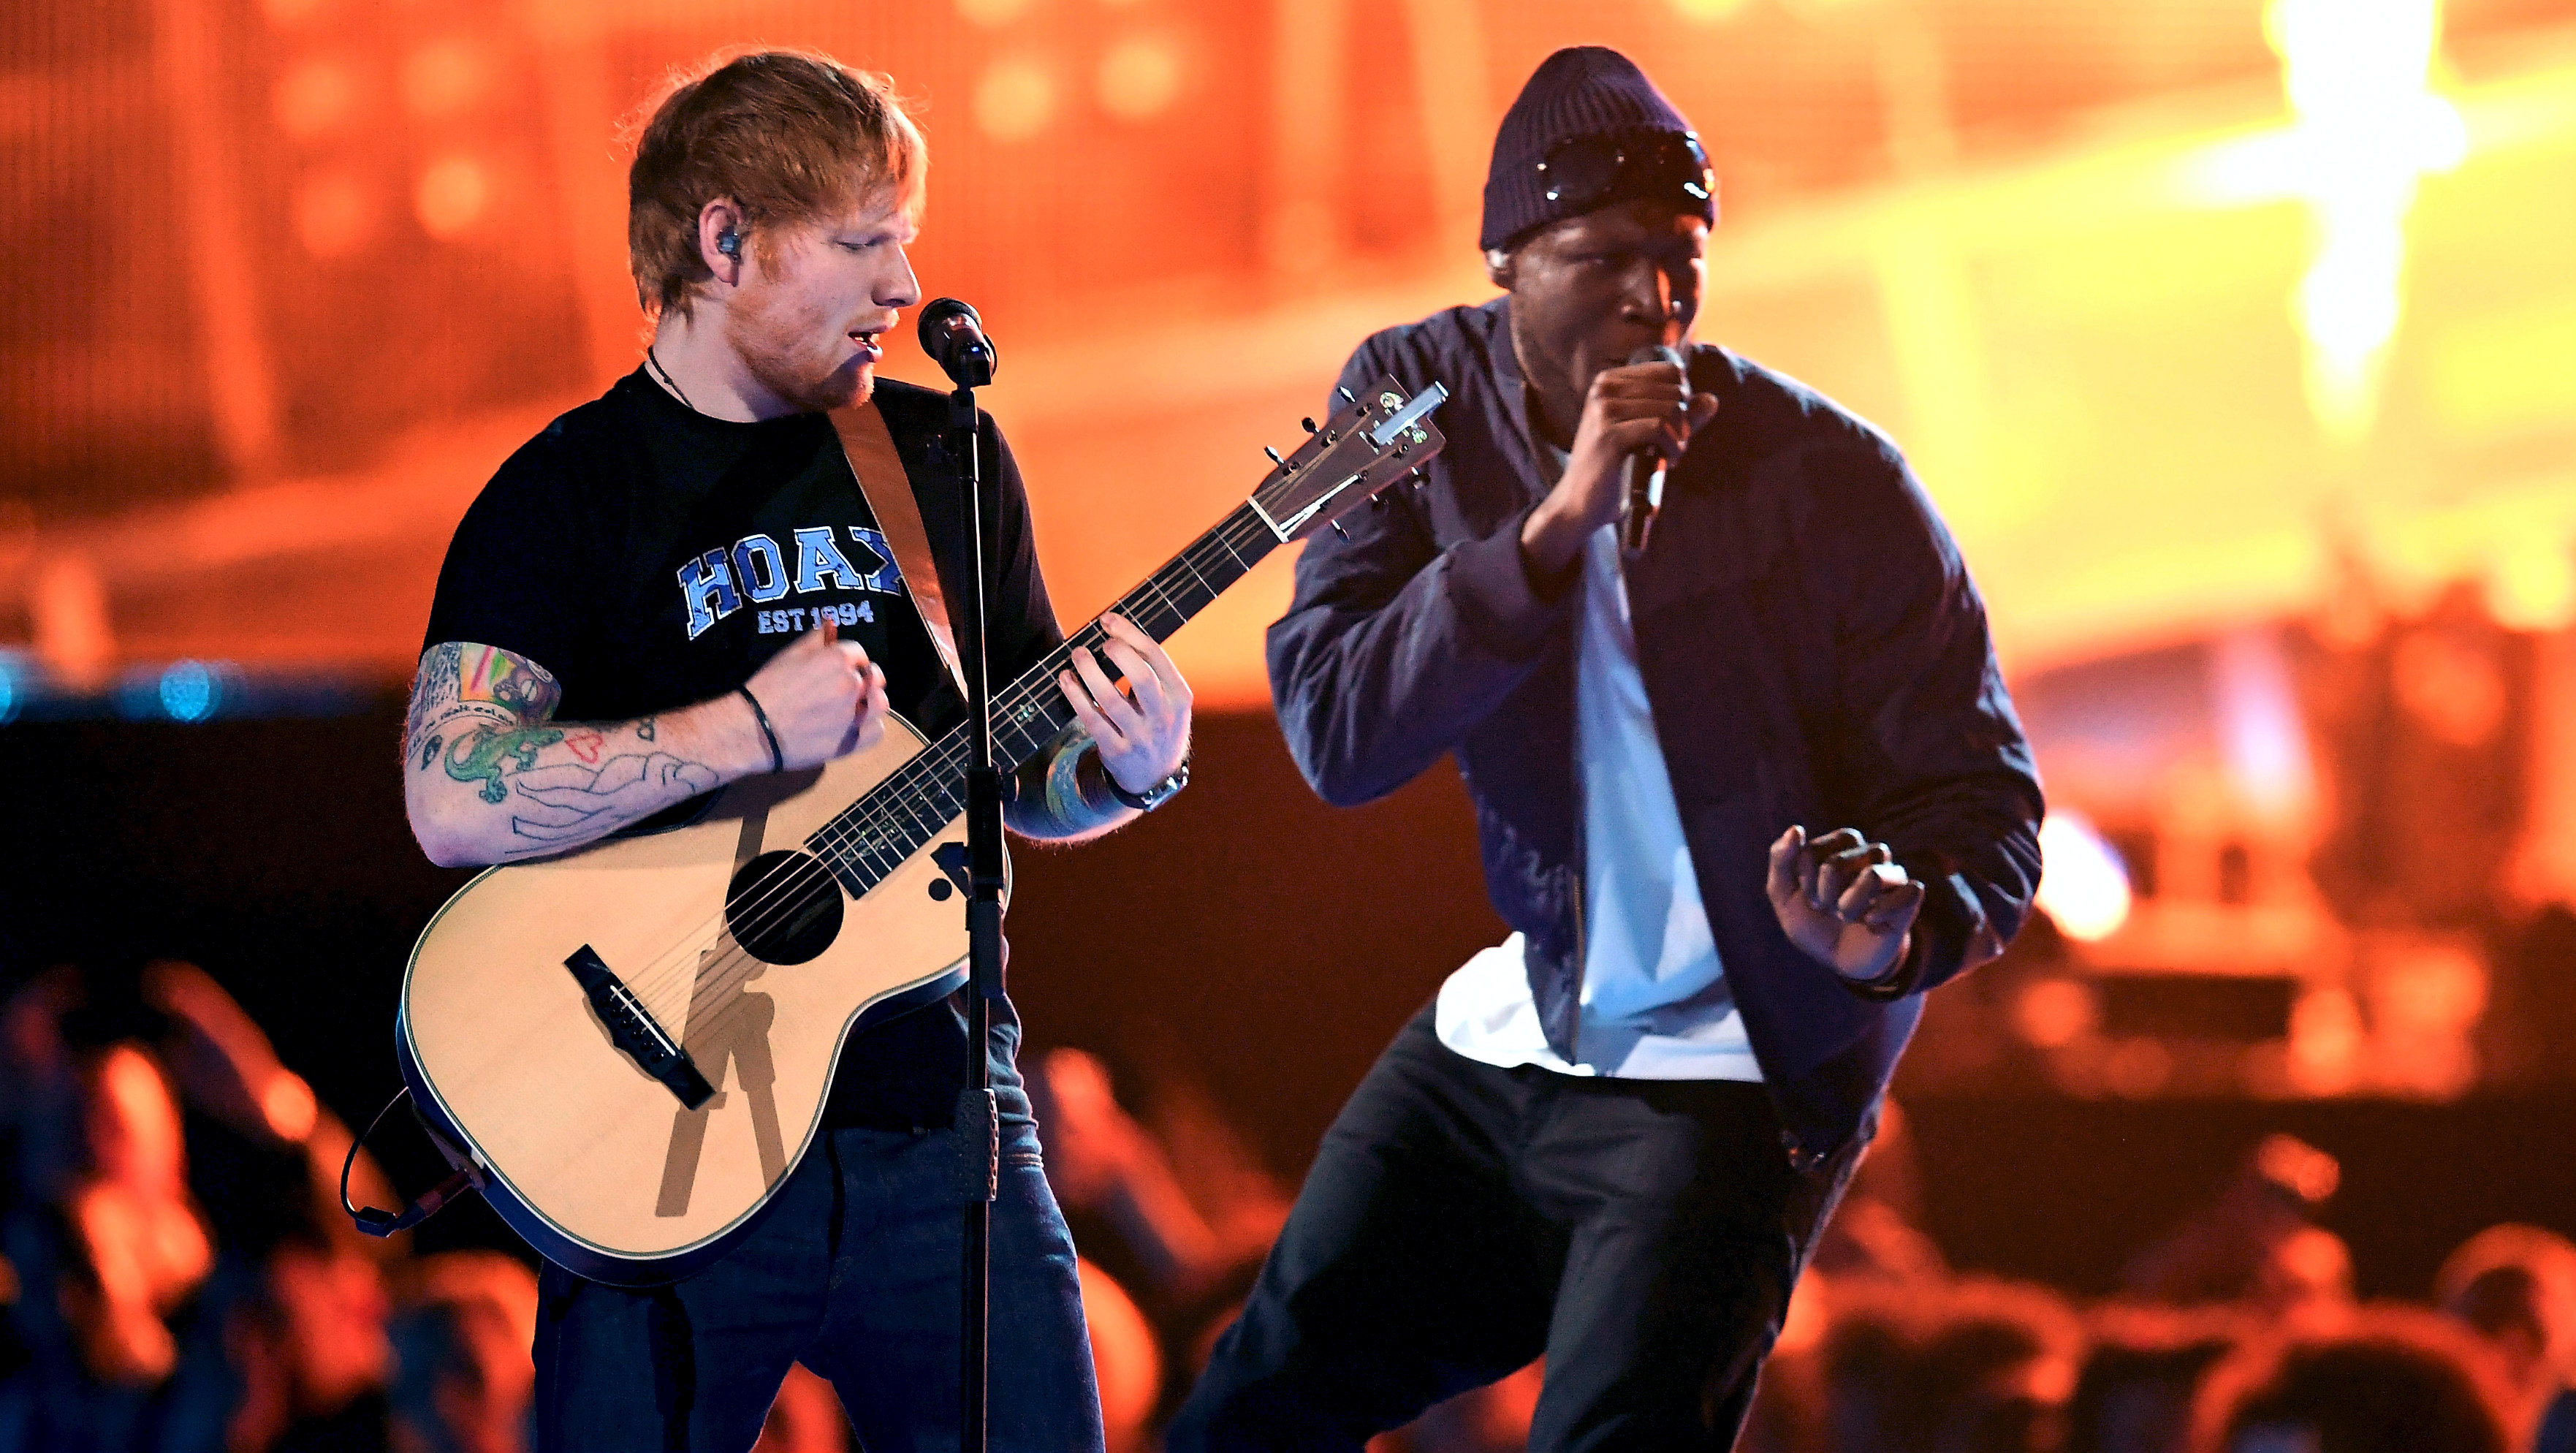 Ed Sheeran and Stormzy team up on stage during the Brit Awards at the O2 Arena in London